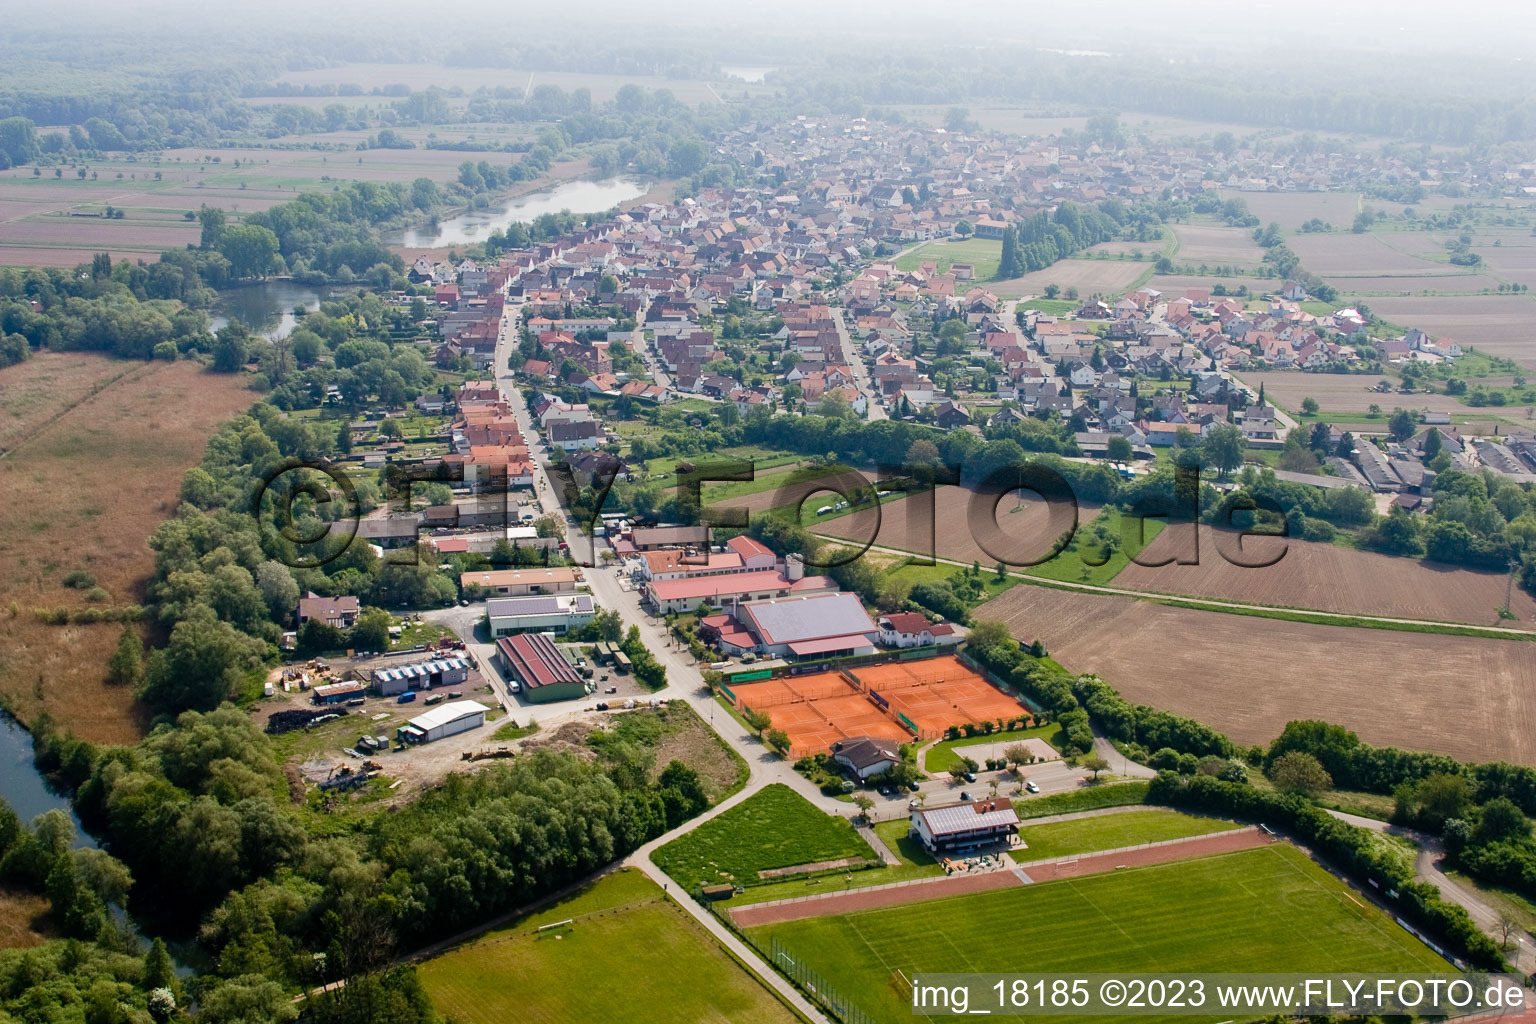 Neuburg in the state Rhineland-Palatinate, Germany from the drone perspective